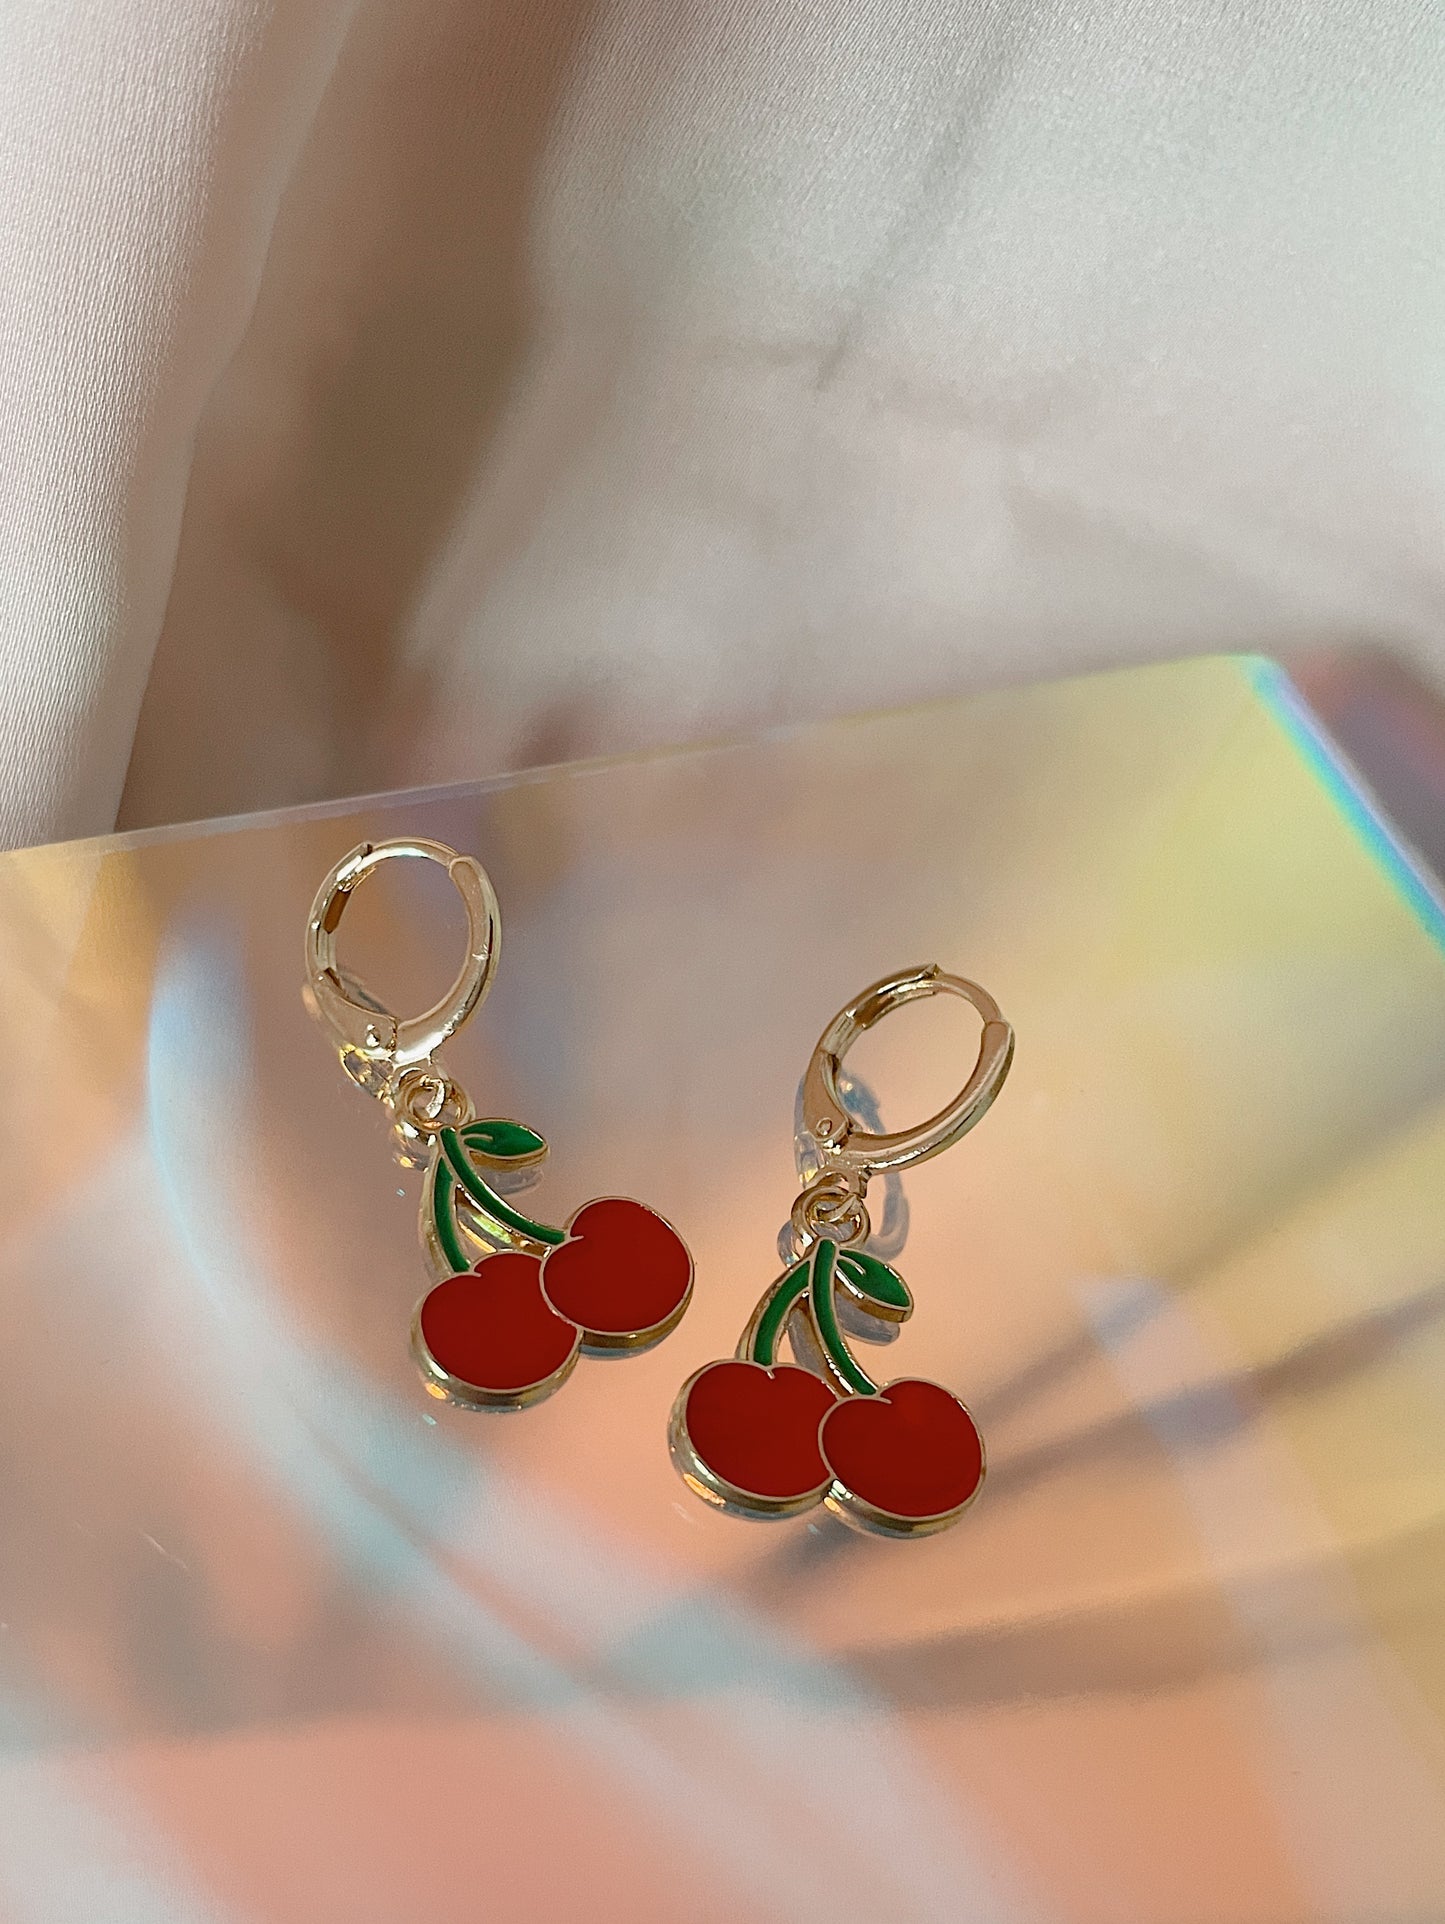 CHERRY - 14k gold plated hoop earrings with cherry charm